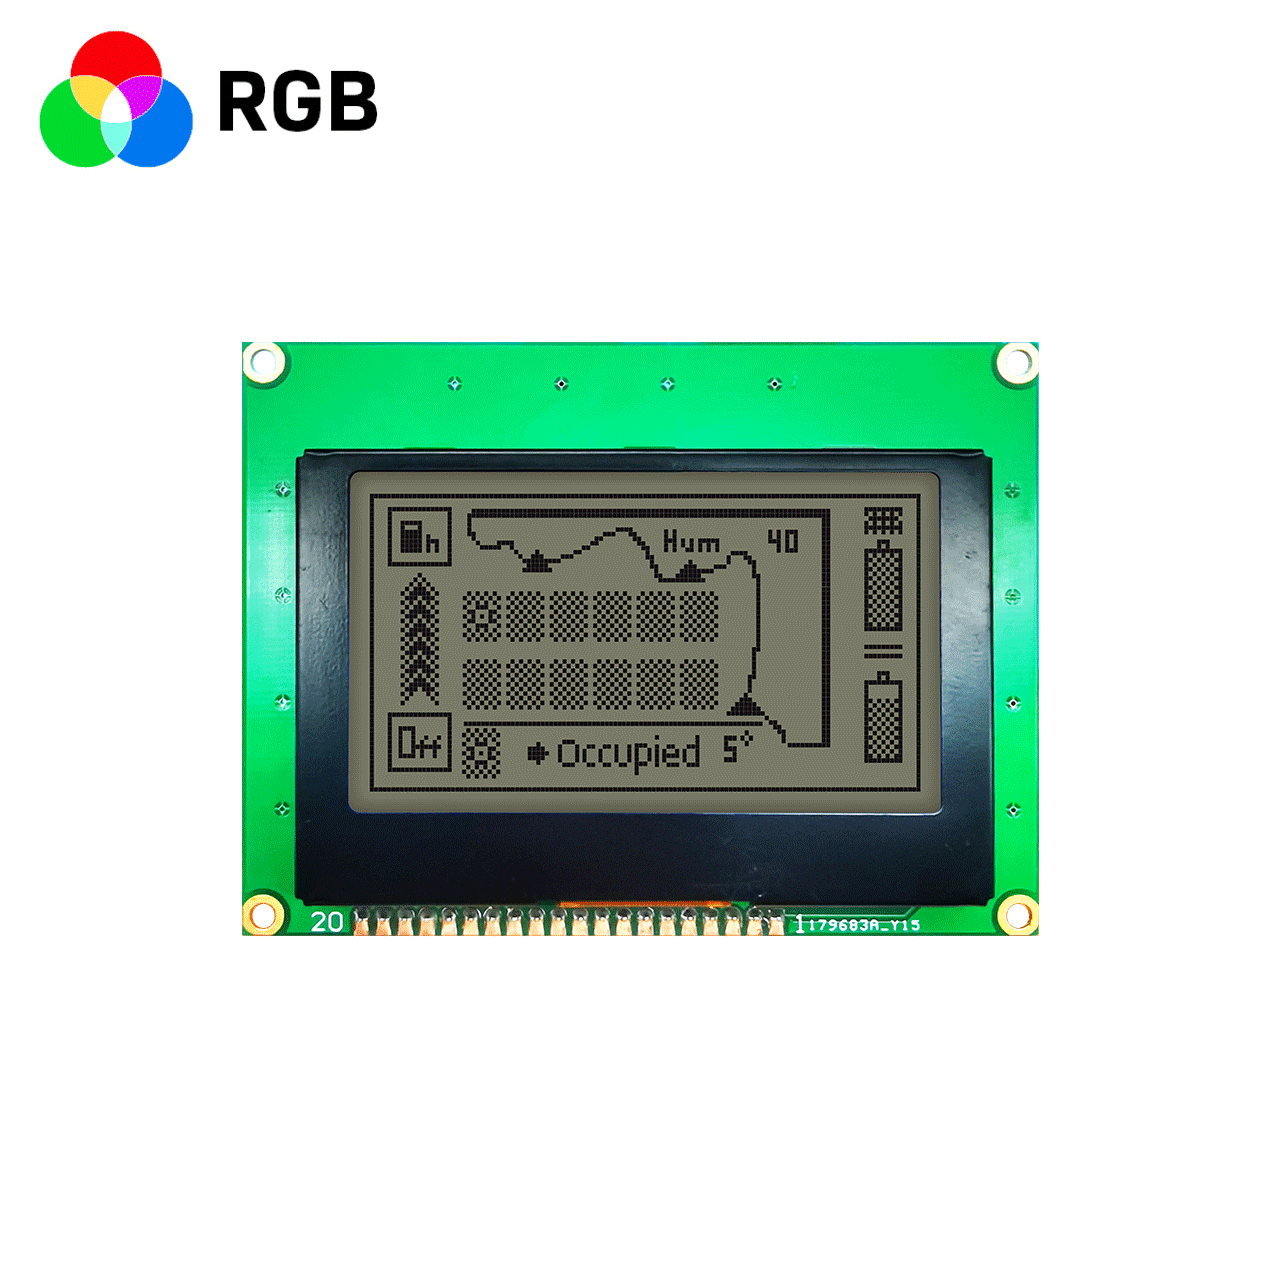 3.0 inch 128x64 Graphic LCD | RGB | For Arduino | SPI Interface | 3.3V